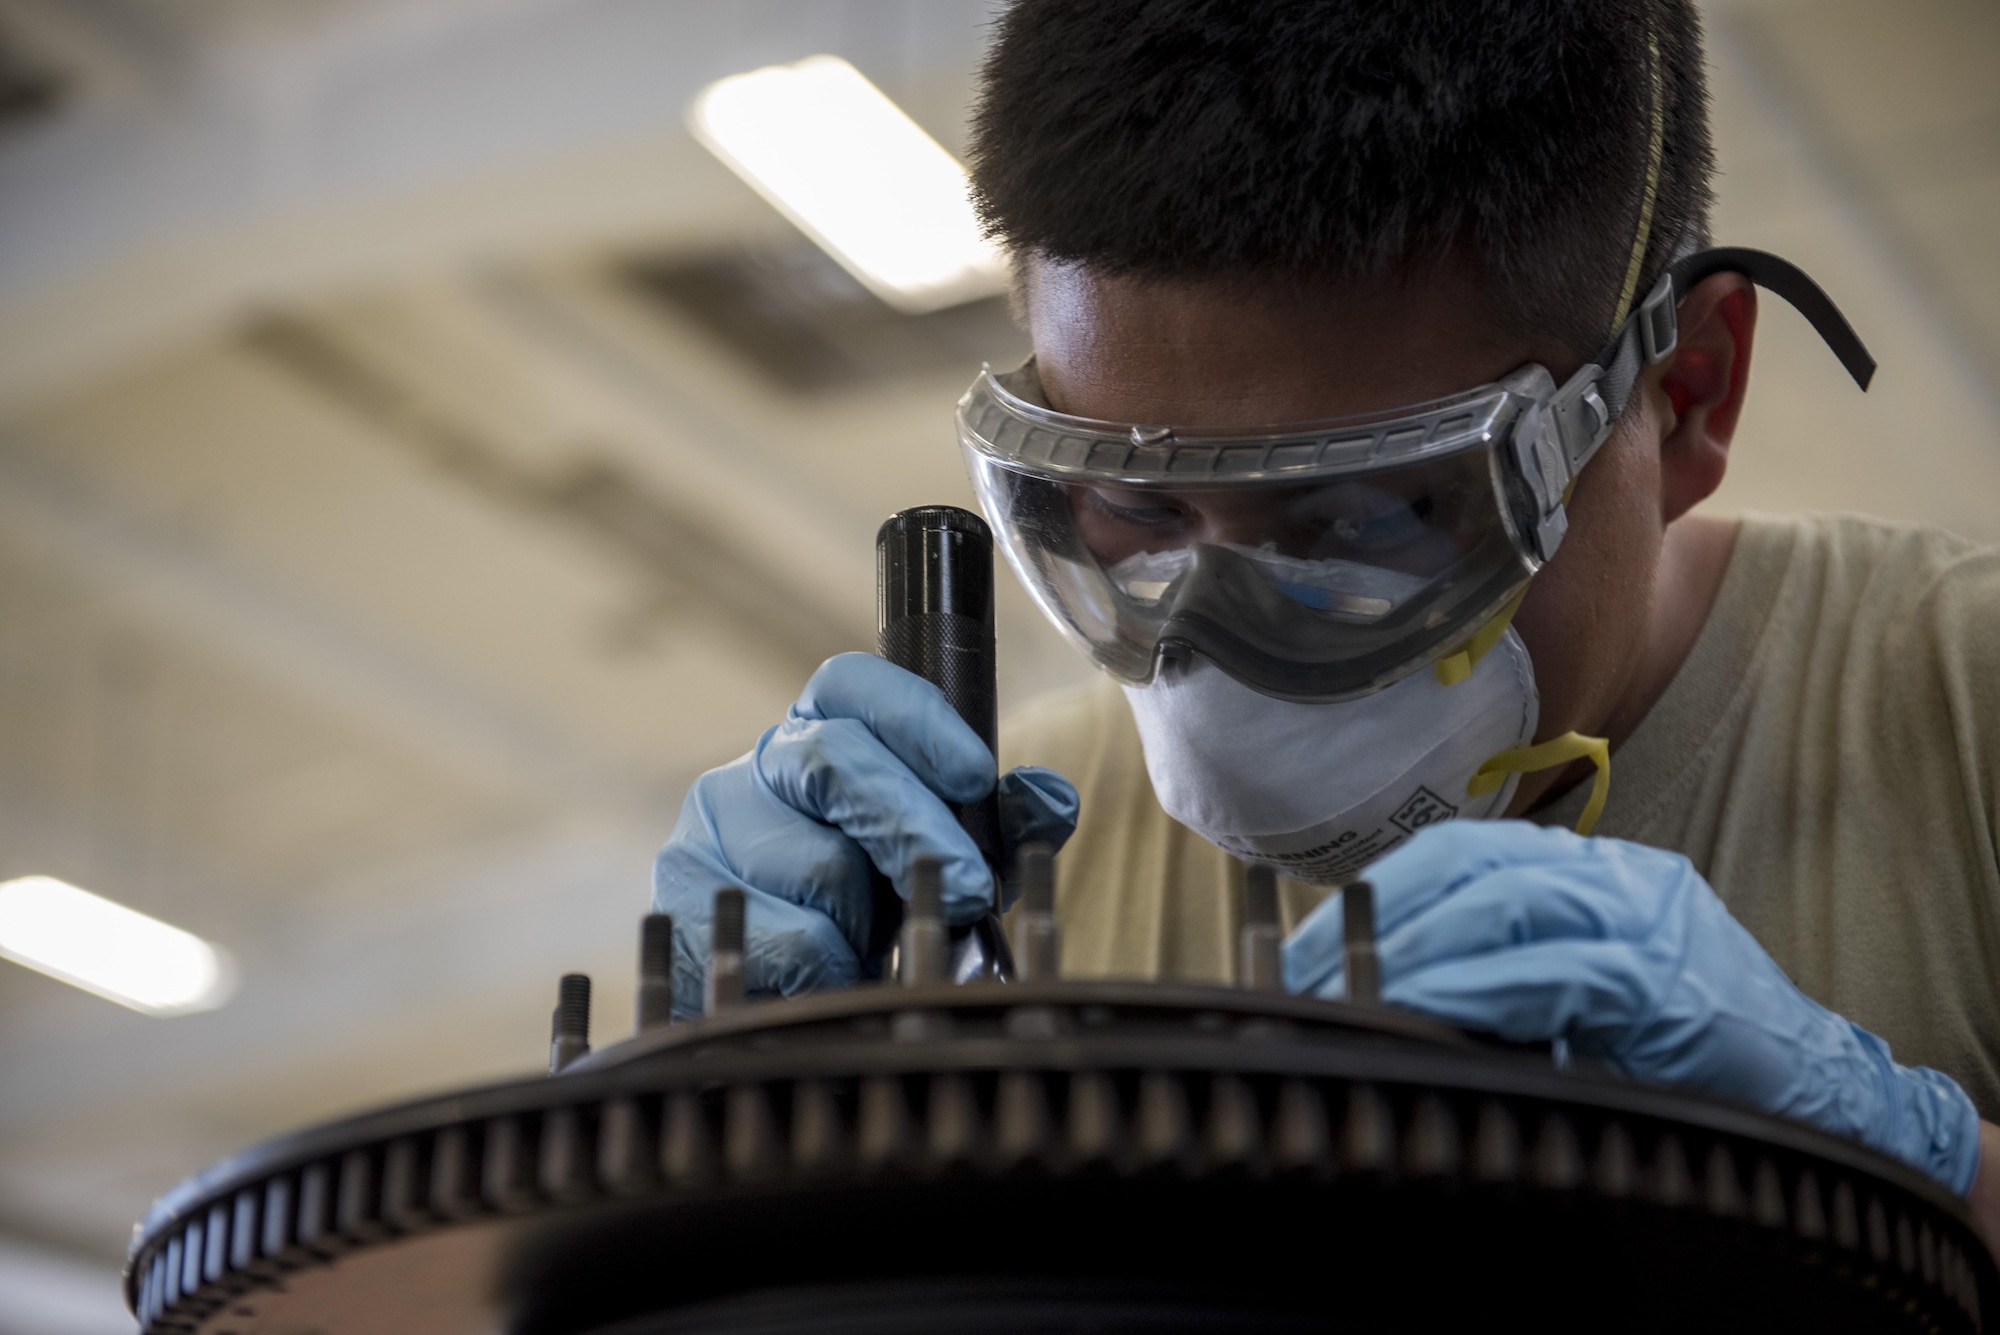 U.S. Air Force Senior Airman Jimmy Thompson, 18th Component Maintenance Squadron aerospace propulsion craftsman, inspects the forward cooling plate of a TF-34 engine July 6, 2017, at Kadena Air Base, Japan. The 18th CMS provides engine maintenance services for various Kadena airframes as well as A-10 Thunderbolt II aircraft from the 51st Fighter Wing, Osan AB, Republic of Korea.